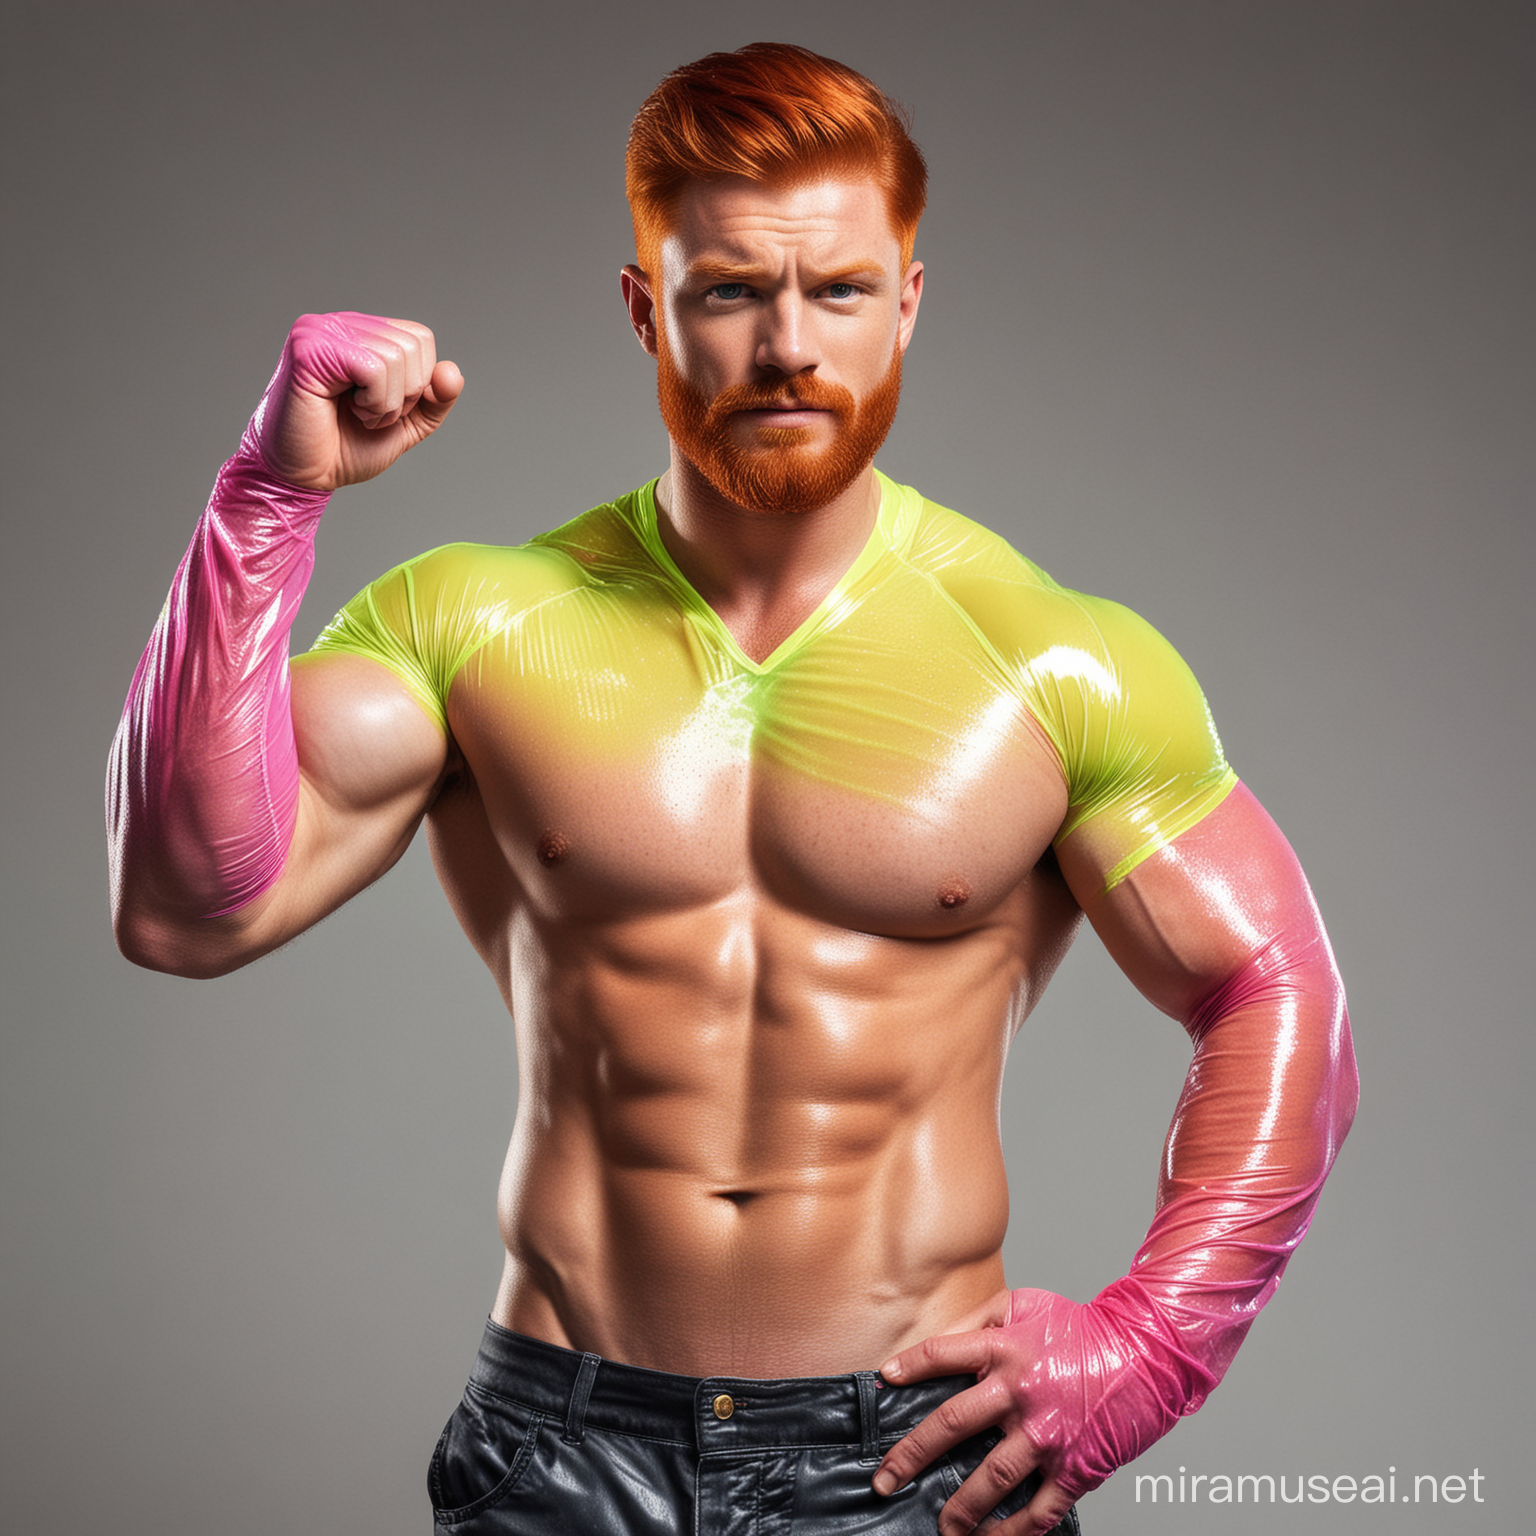 Topless 30s Ultra Muscular Red Head World's Strongest Handsome Man wearing unzipped Bright Highlighter Multi-Coloured See Through Jacket and Flexing Big Strong Arm